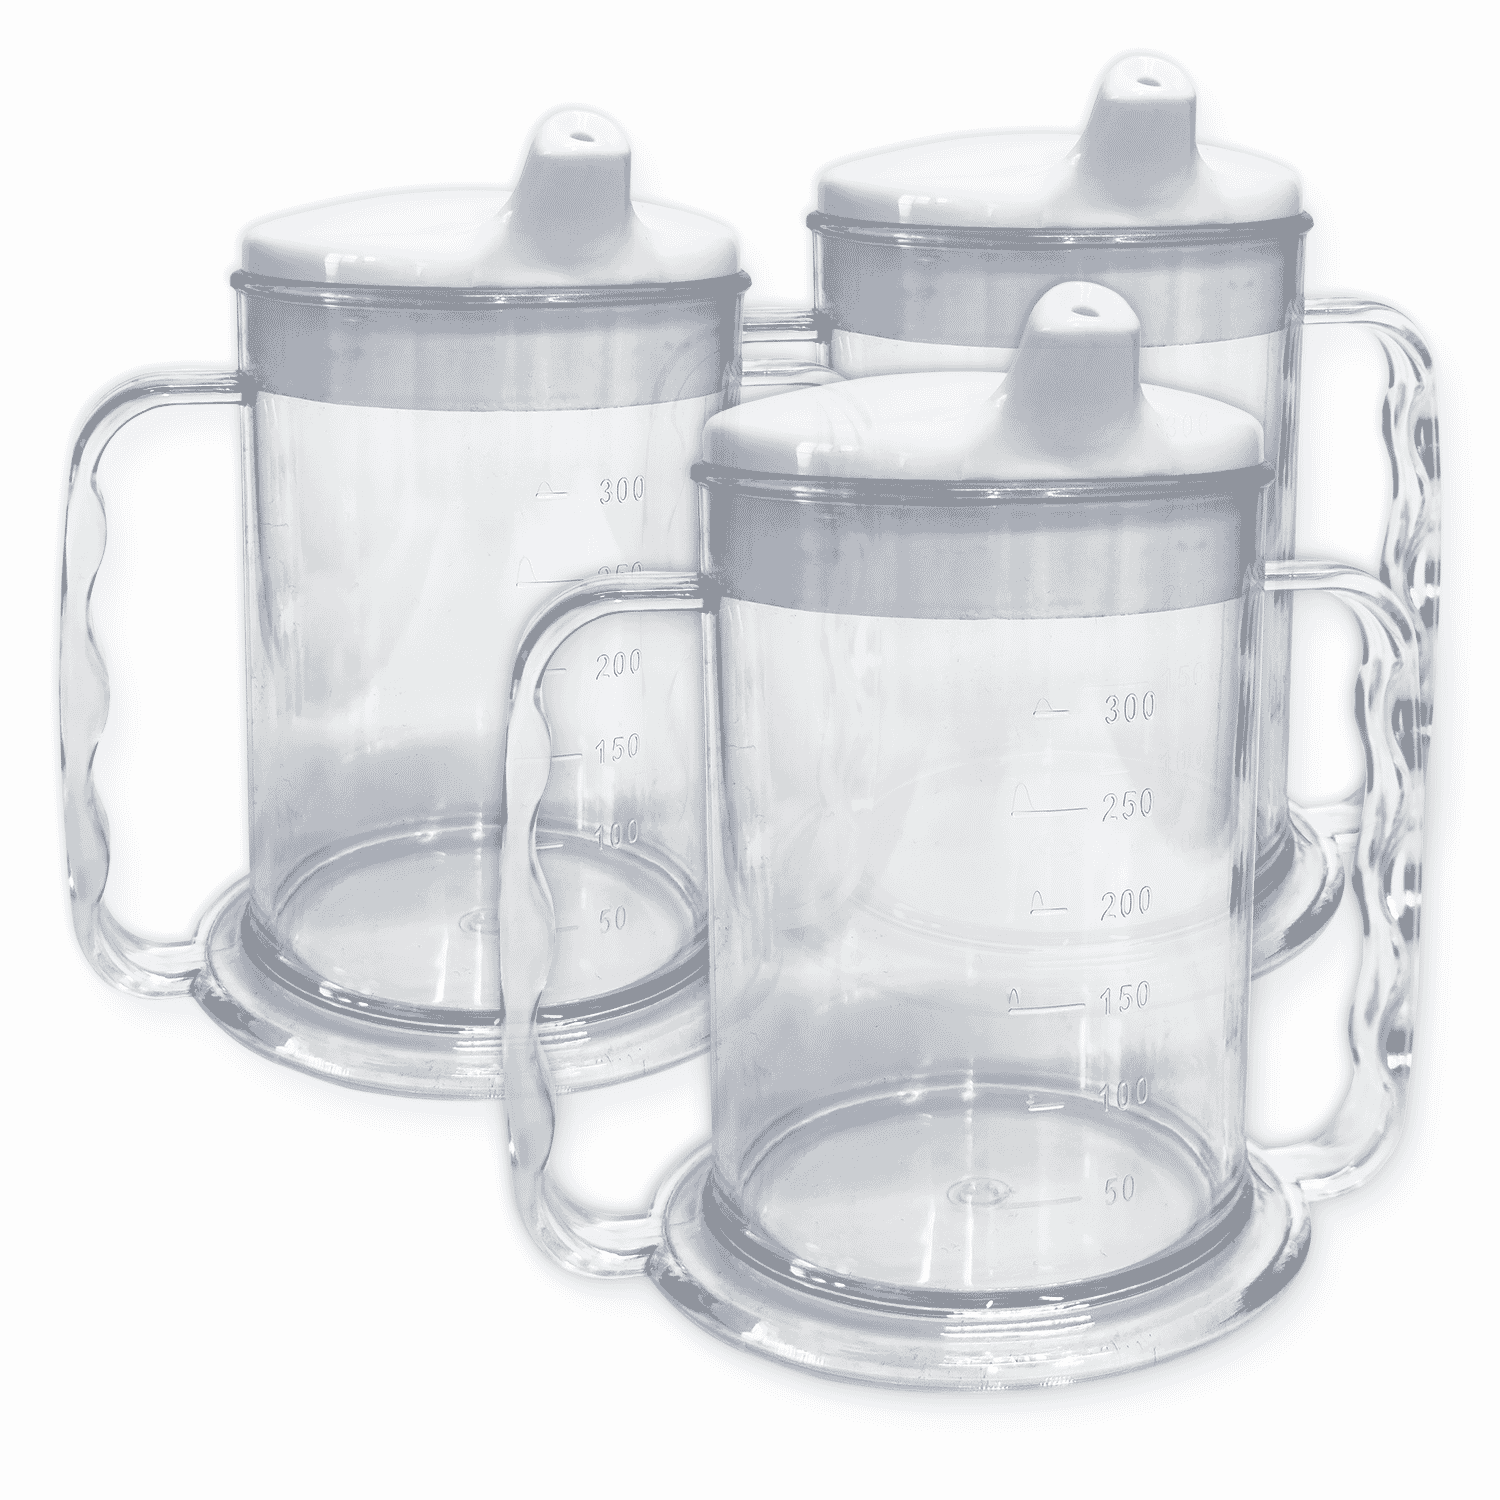 View Wide Base Mug With Lid Pack of 3 information